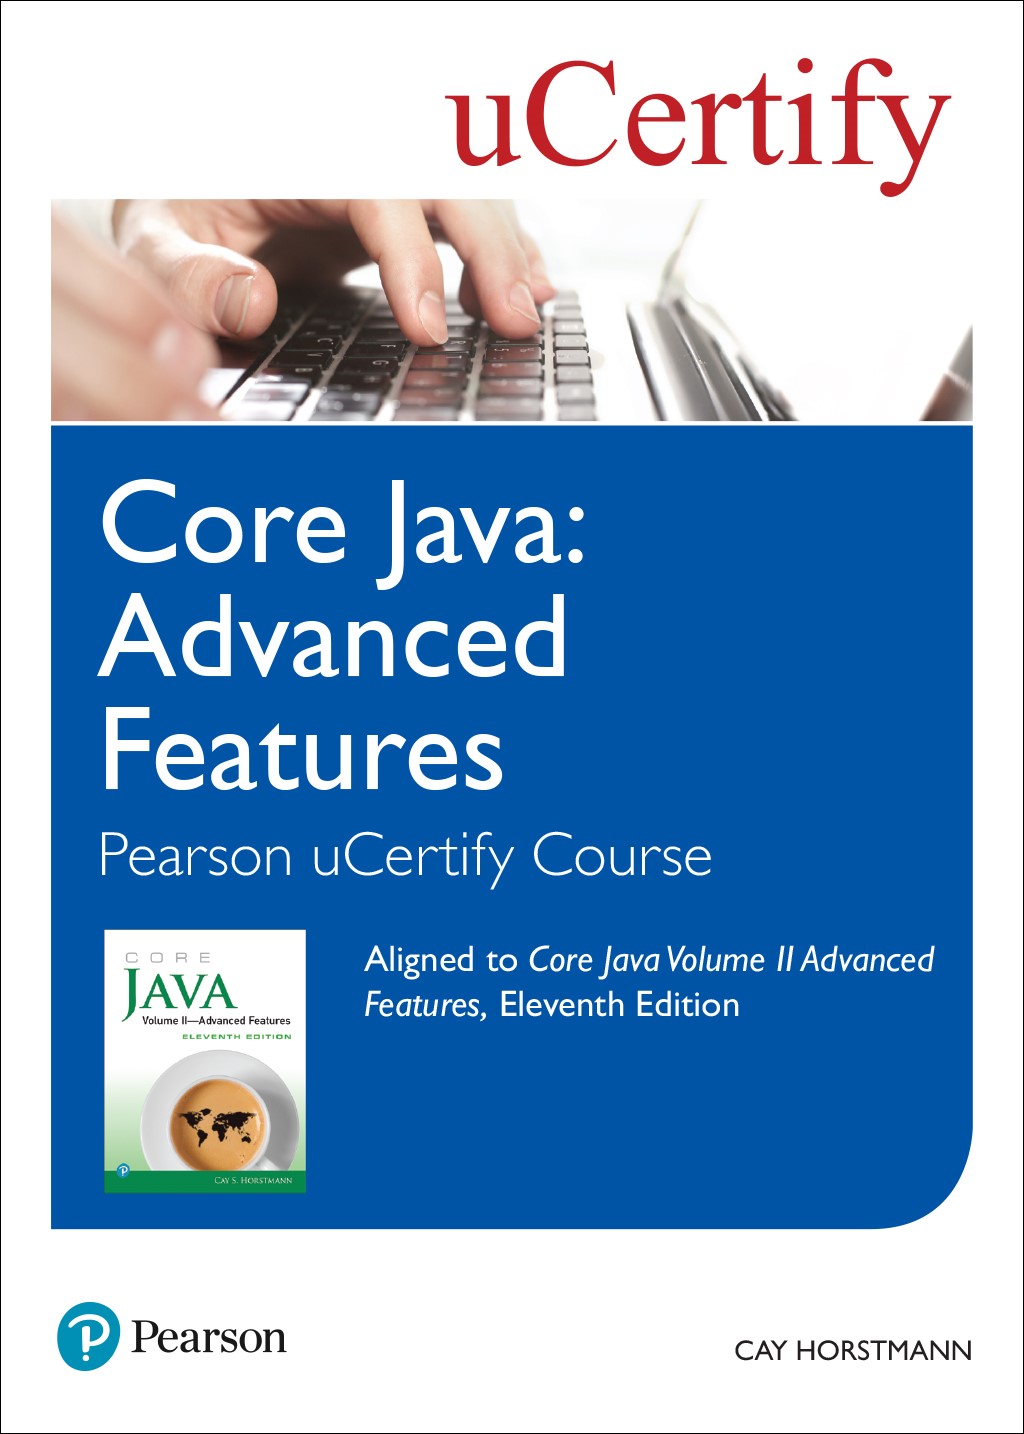 Core Java: Advanced Features Pearson uCertify Course Access Code Card, 11th Edition